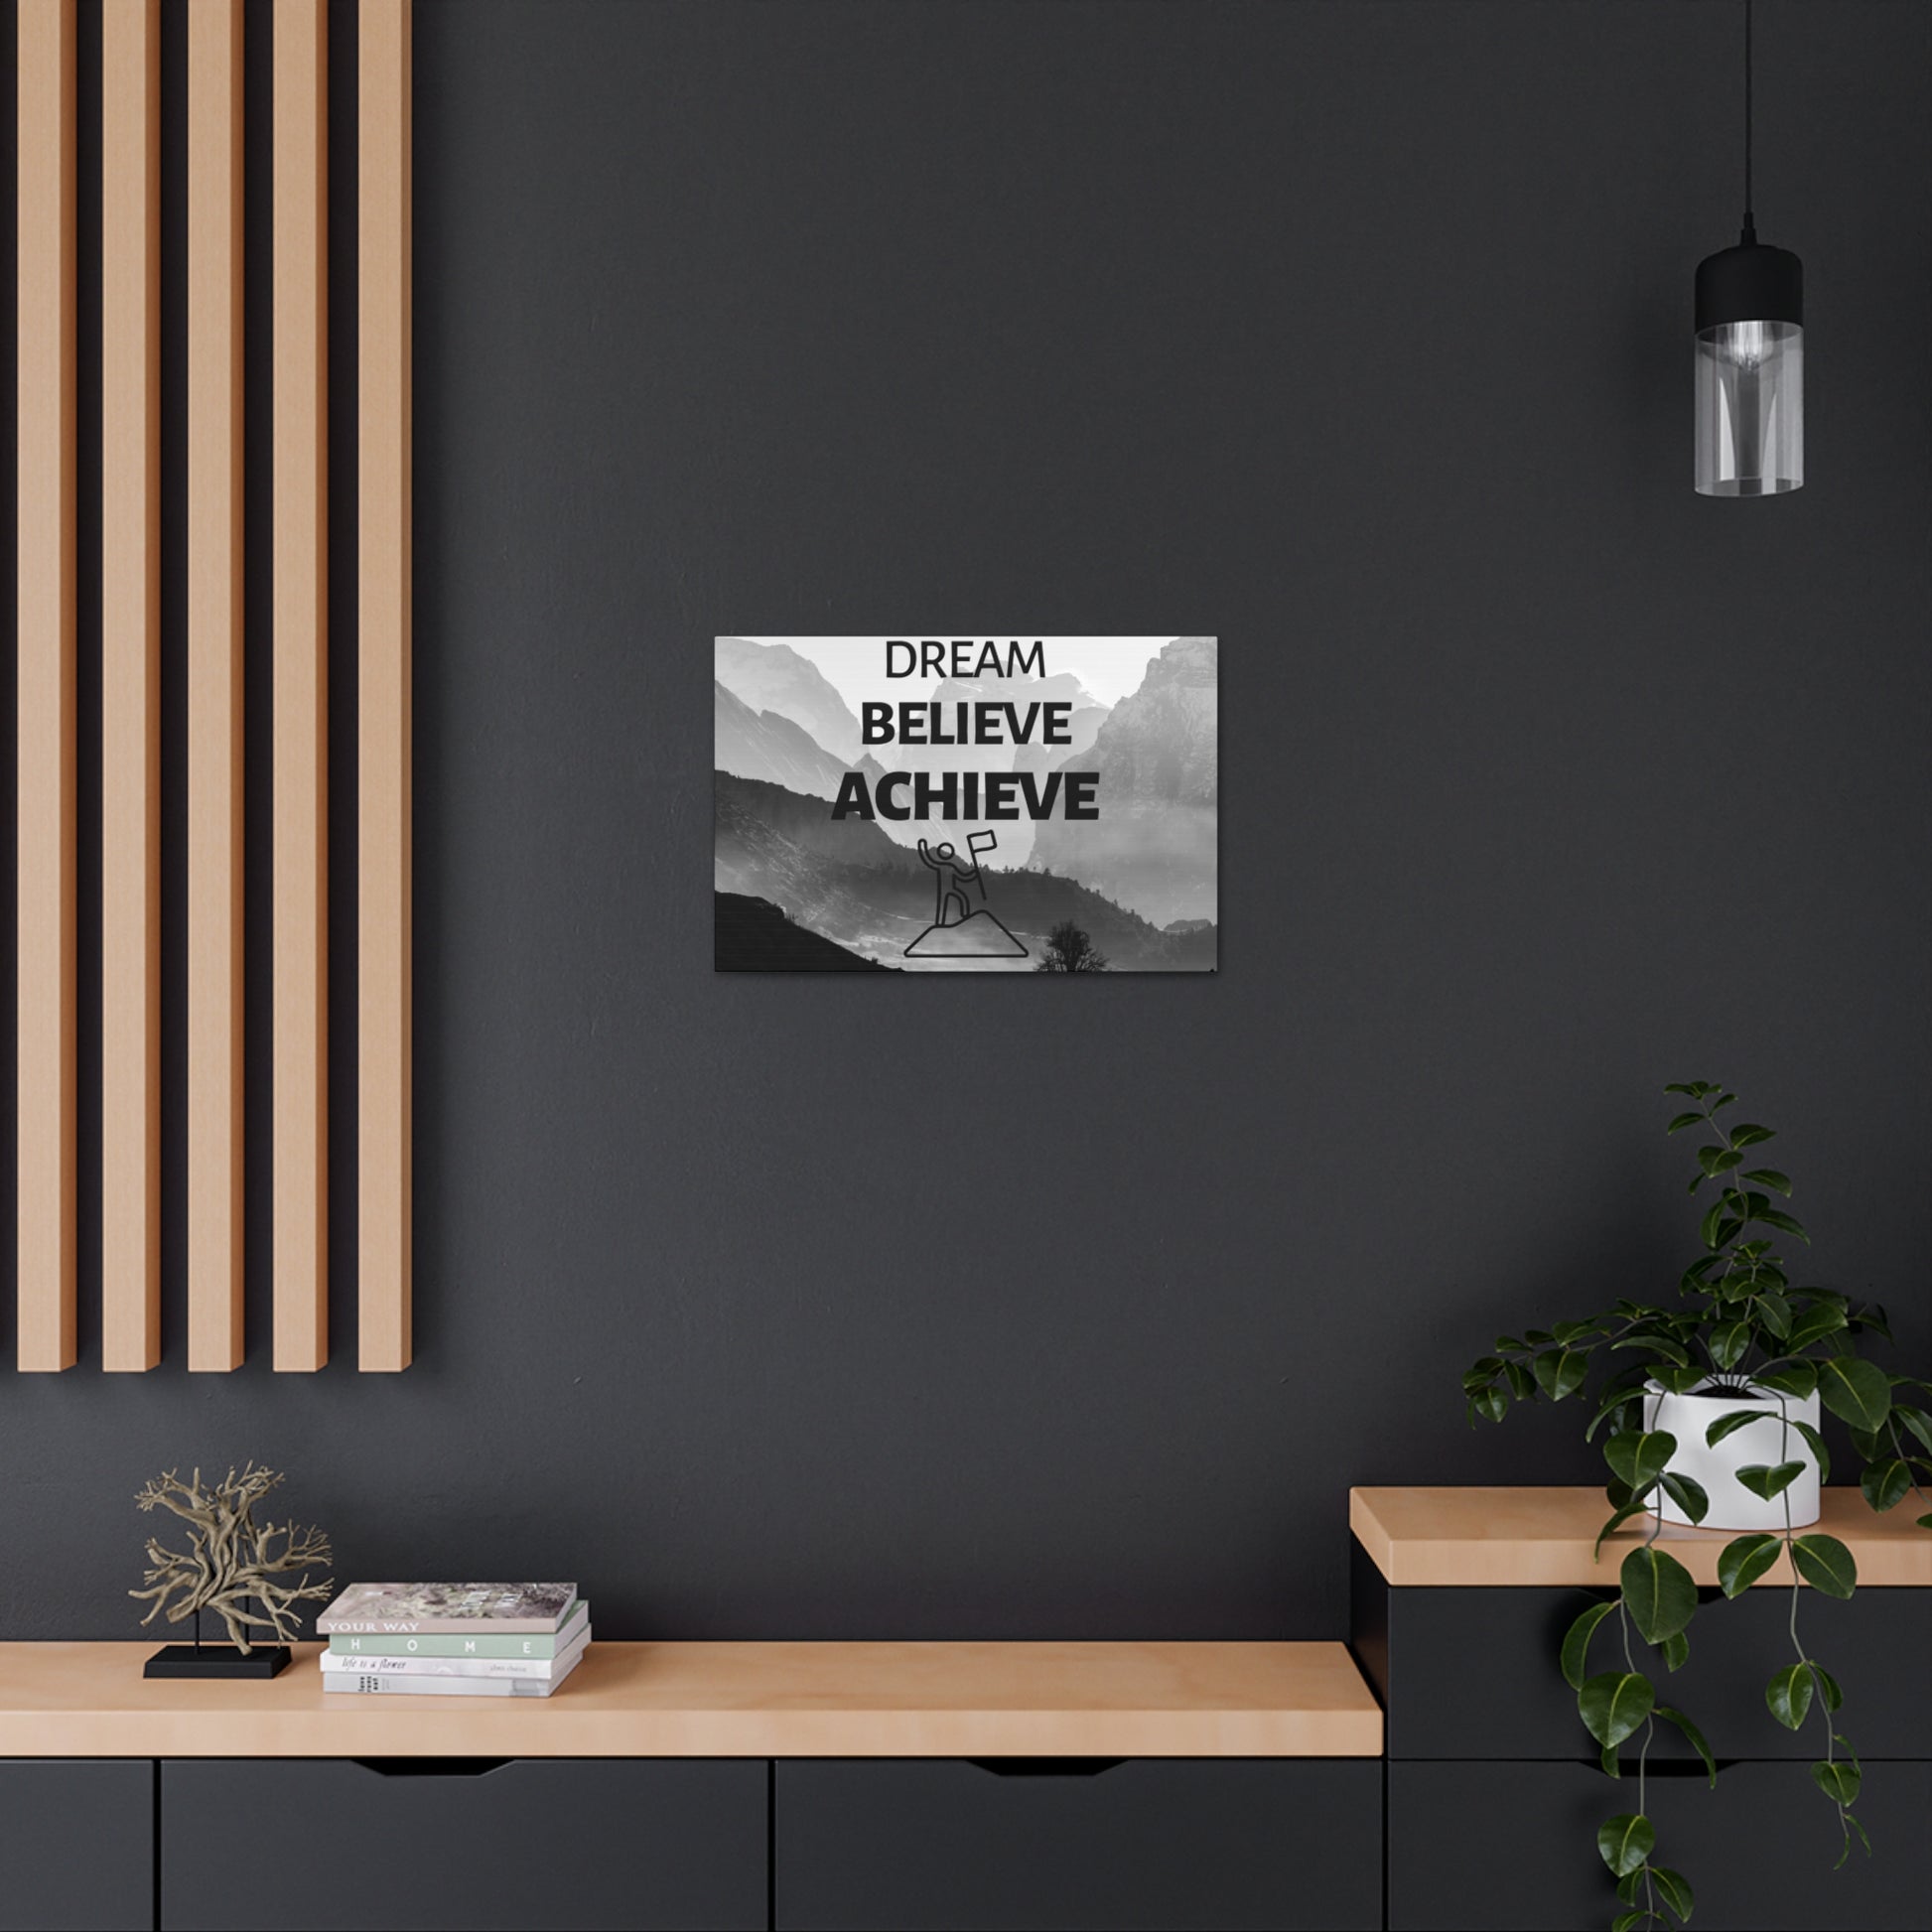 "Dream Believe Achieve" wall canvas to inspire success and positivity.